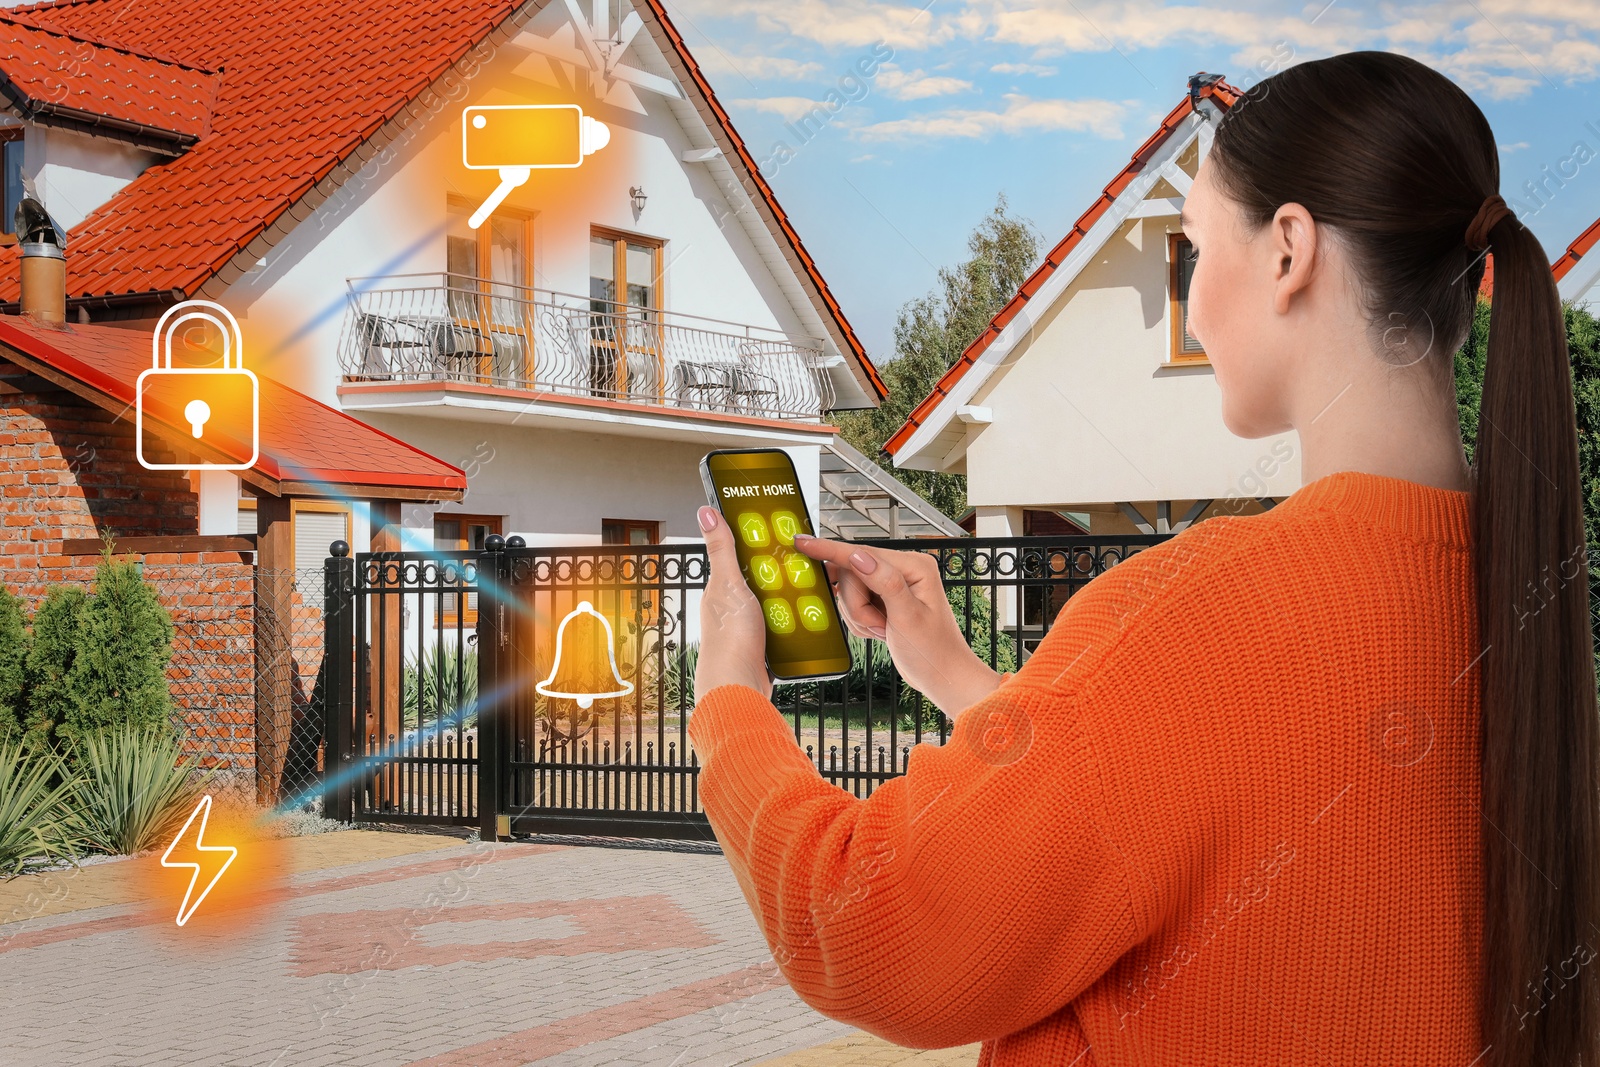 Image of Woman using smart home control system via application on mobile phone outdoors. Different icons on house